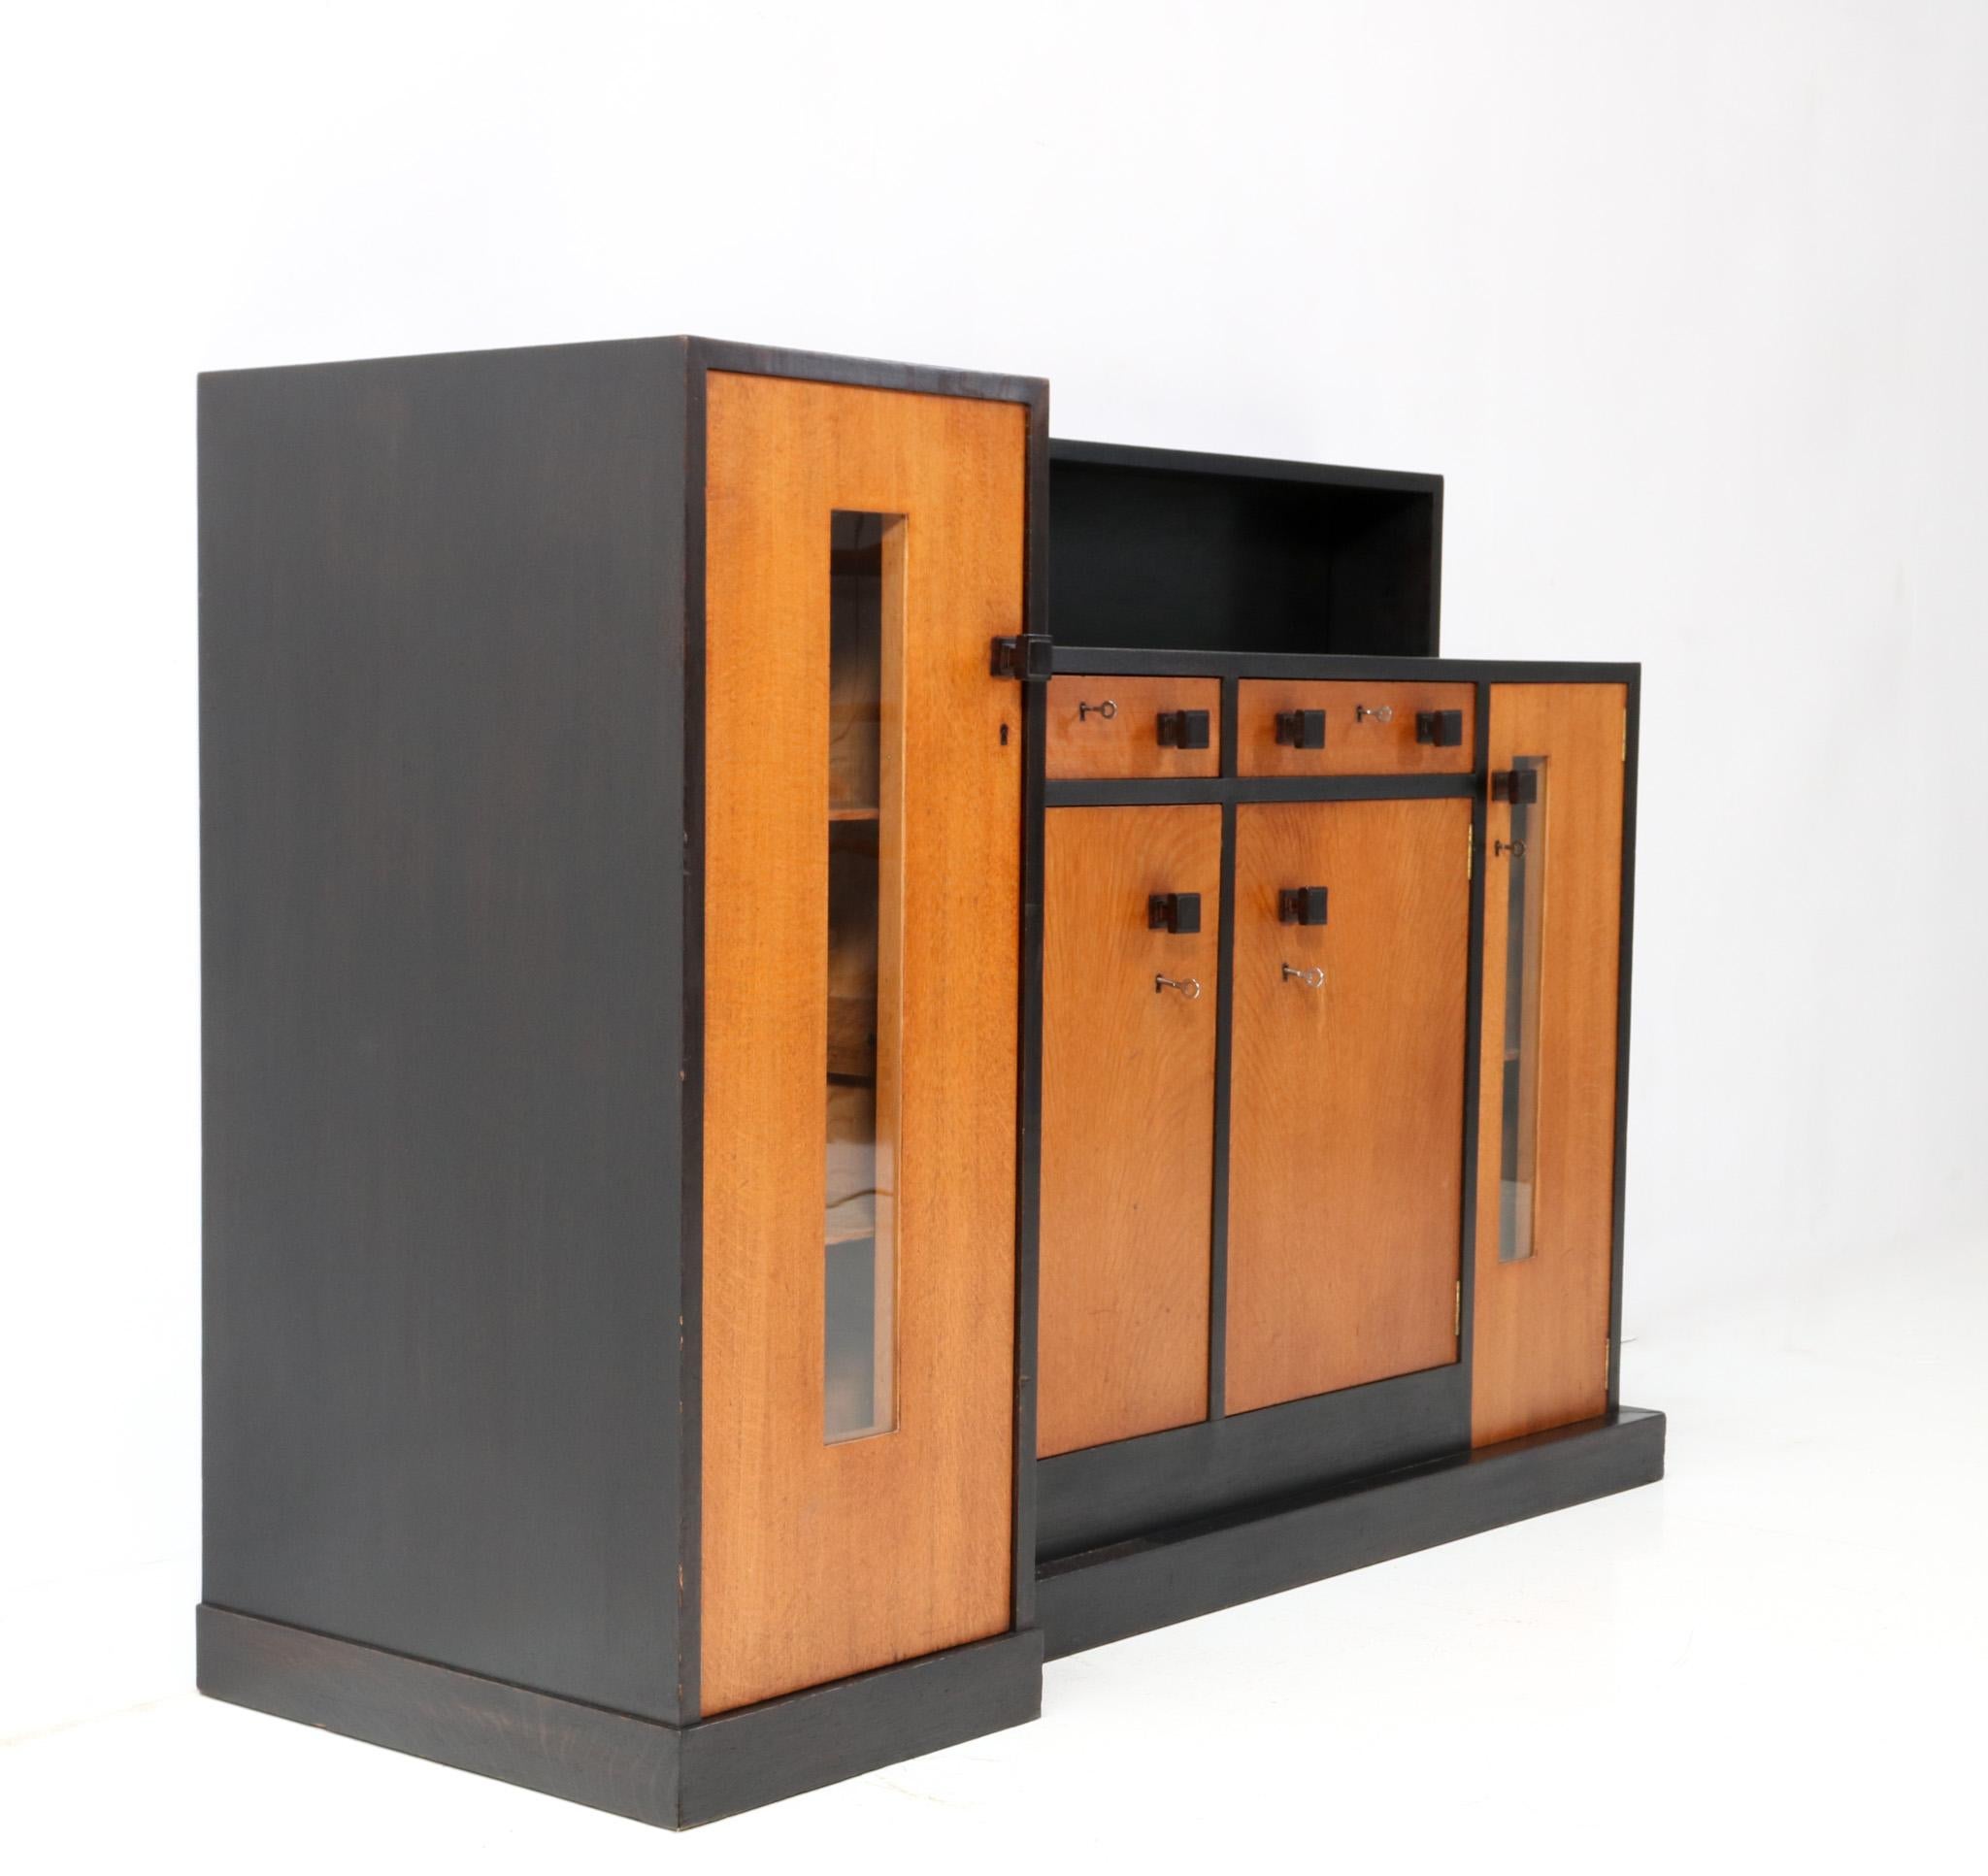 Early 20th Century Oak Modernist Art Deco Sideboard or Credenza by Cor Alons, 1927 For Sale